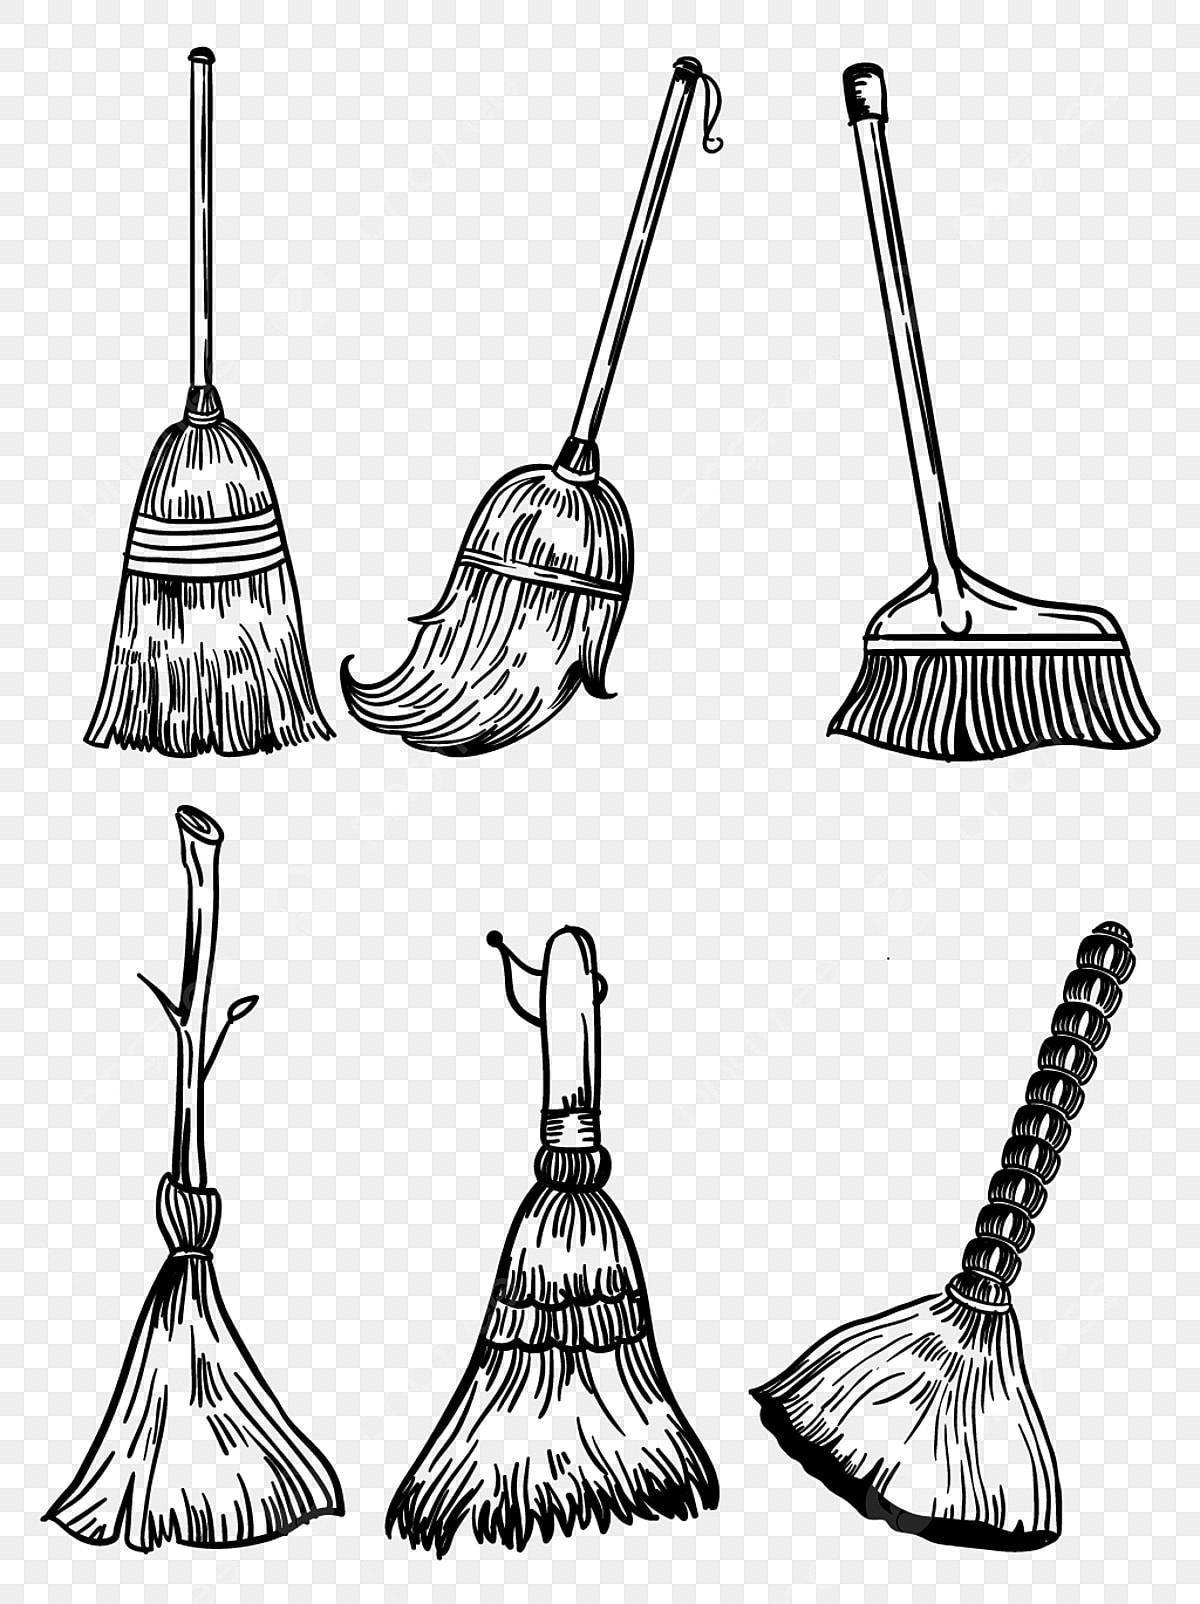 Cute broom coloring page for kids